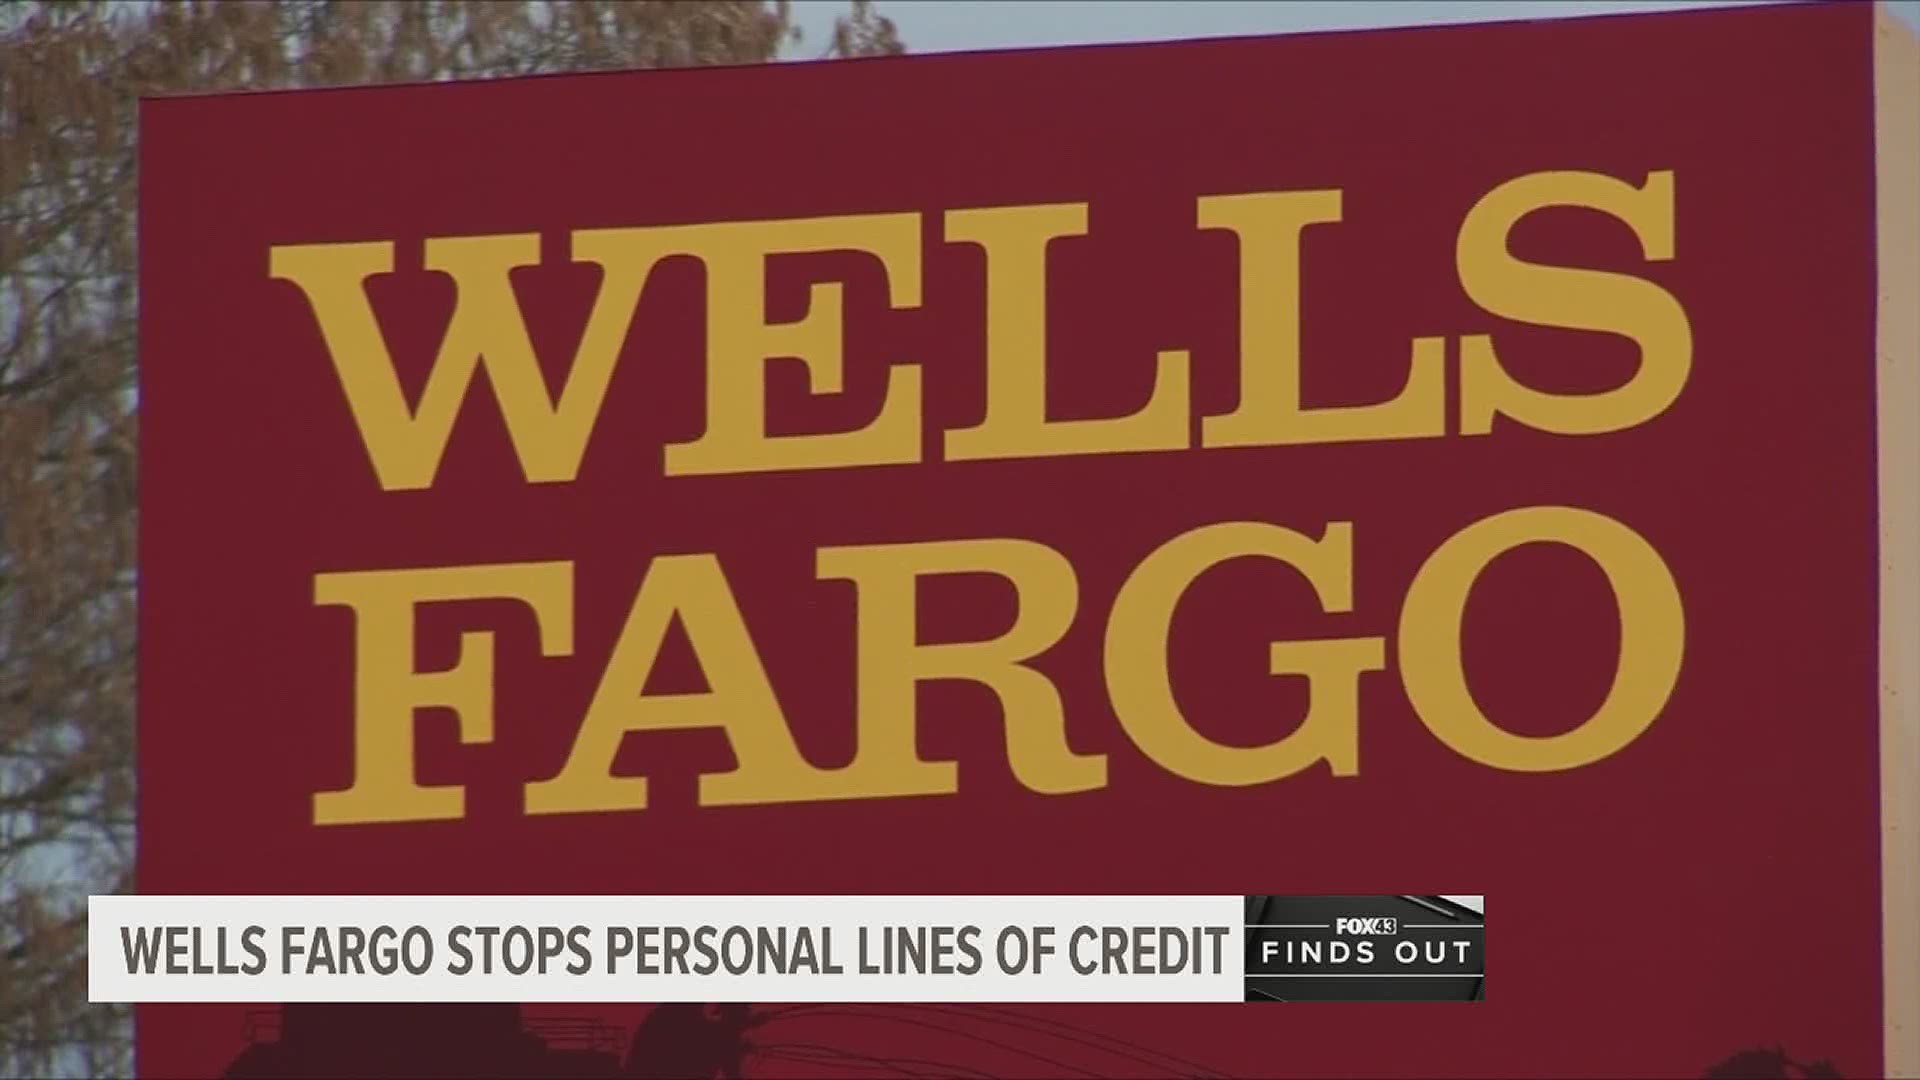 The bank has stopped several borrowing options in recent years. FOX43 Finds Out if it's because of the COVID-19 pandemic or fallout from the fake account scandal.